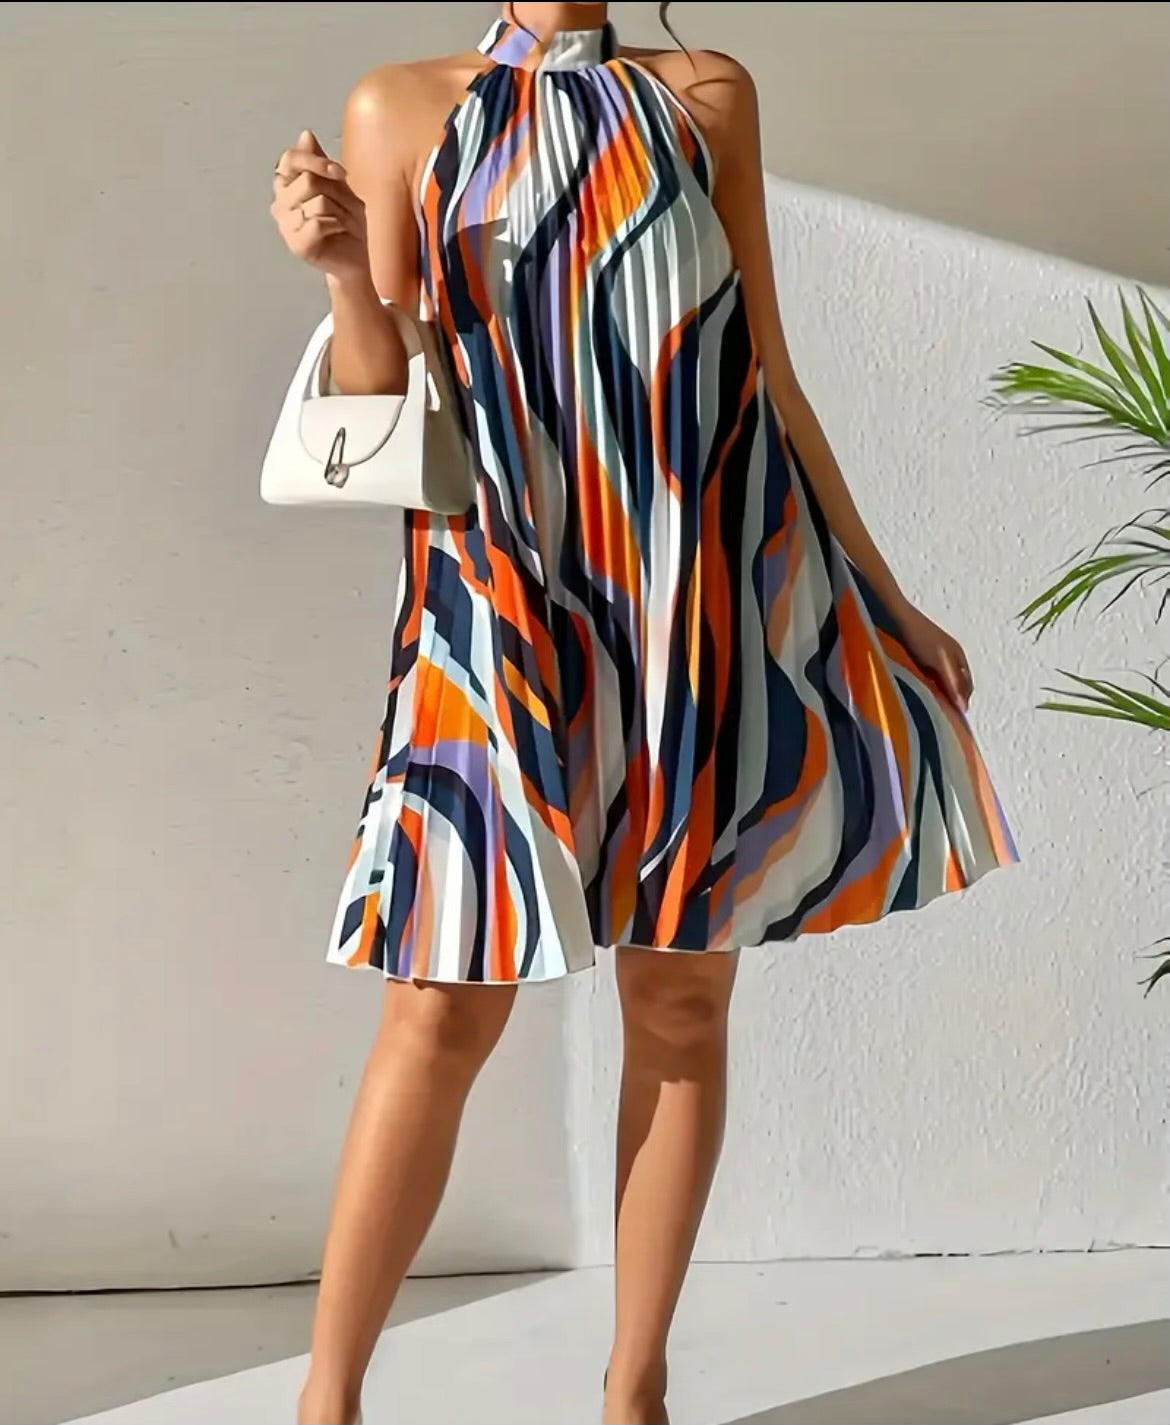 Colorful 70’s Style dress